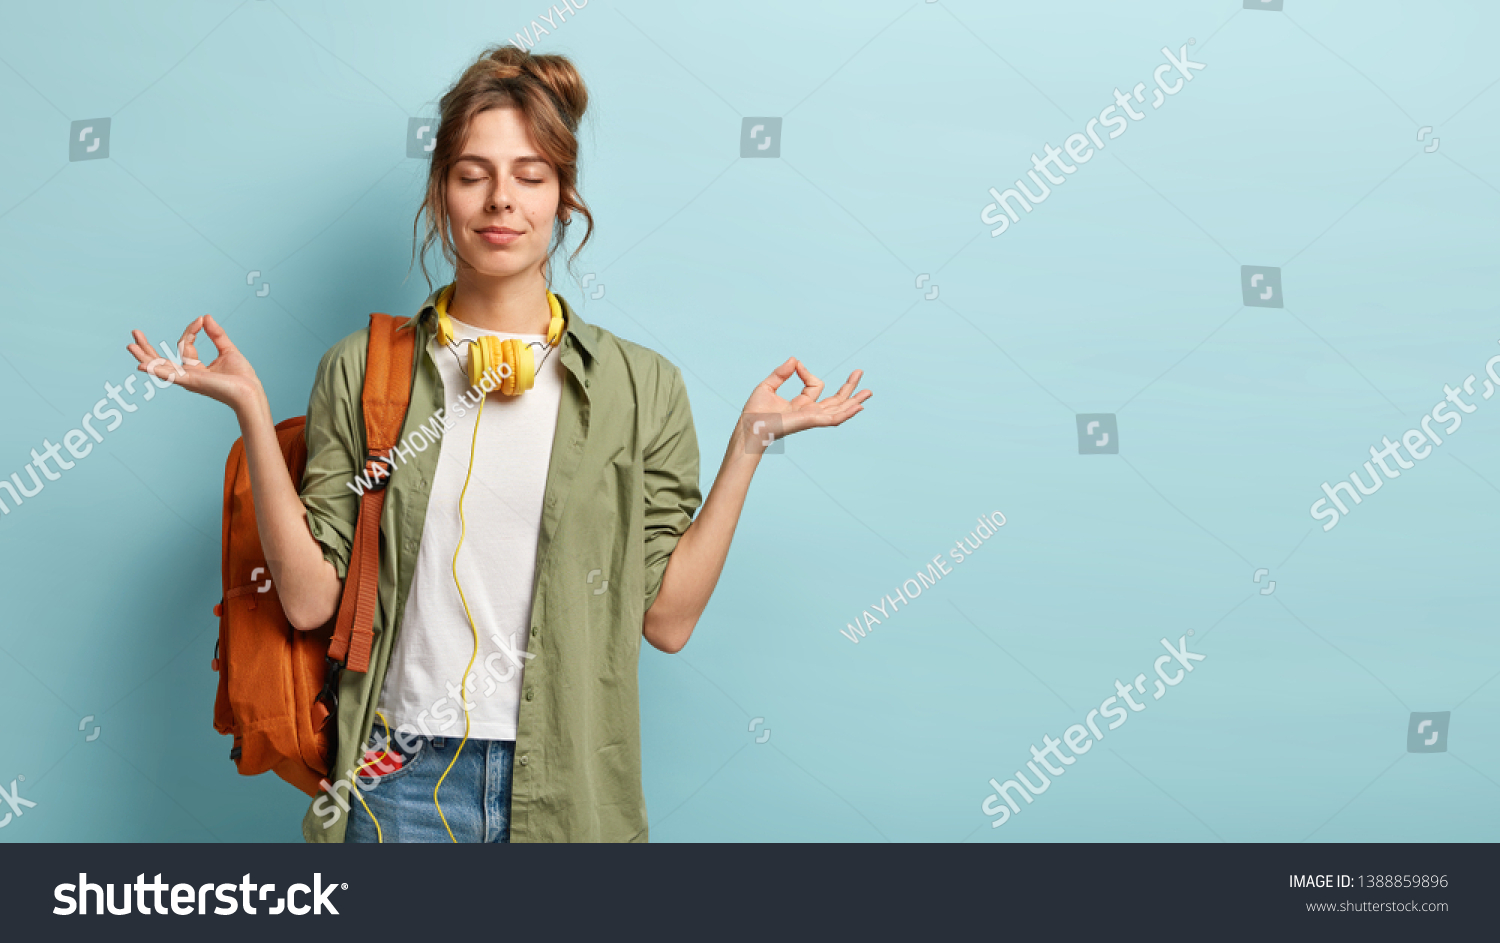 Photo of relaxed student keeps hands in mudra gesture, keeps eyes closed, listens peaceful music, headphones on neck, wears shirt and jeans, has rucksack, isolated on blue background with free space #1388859896